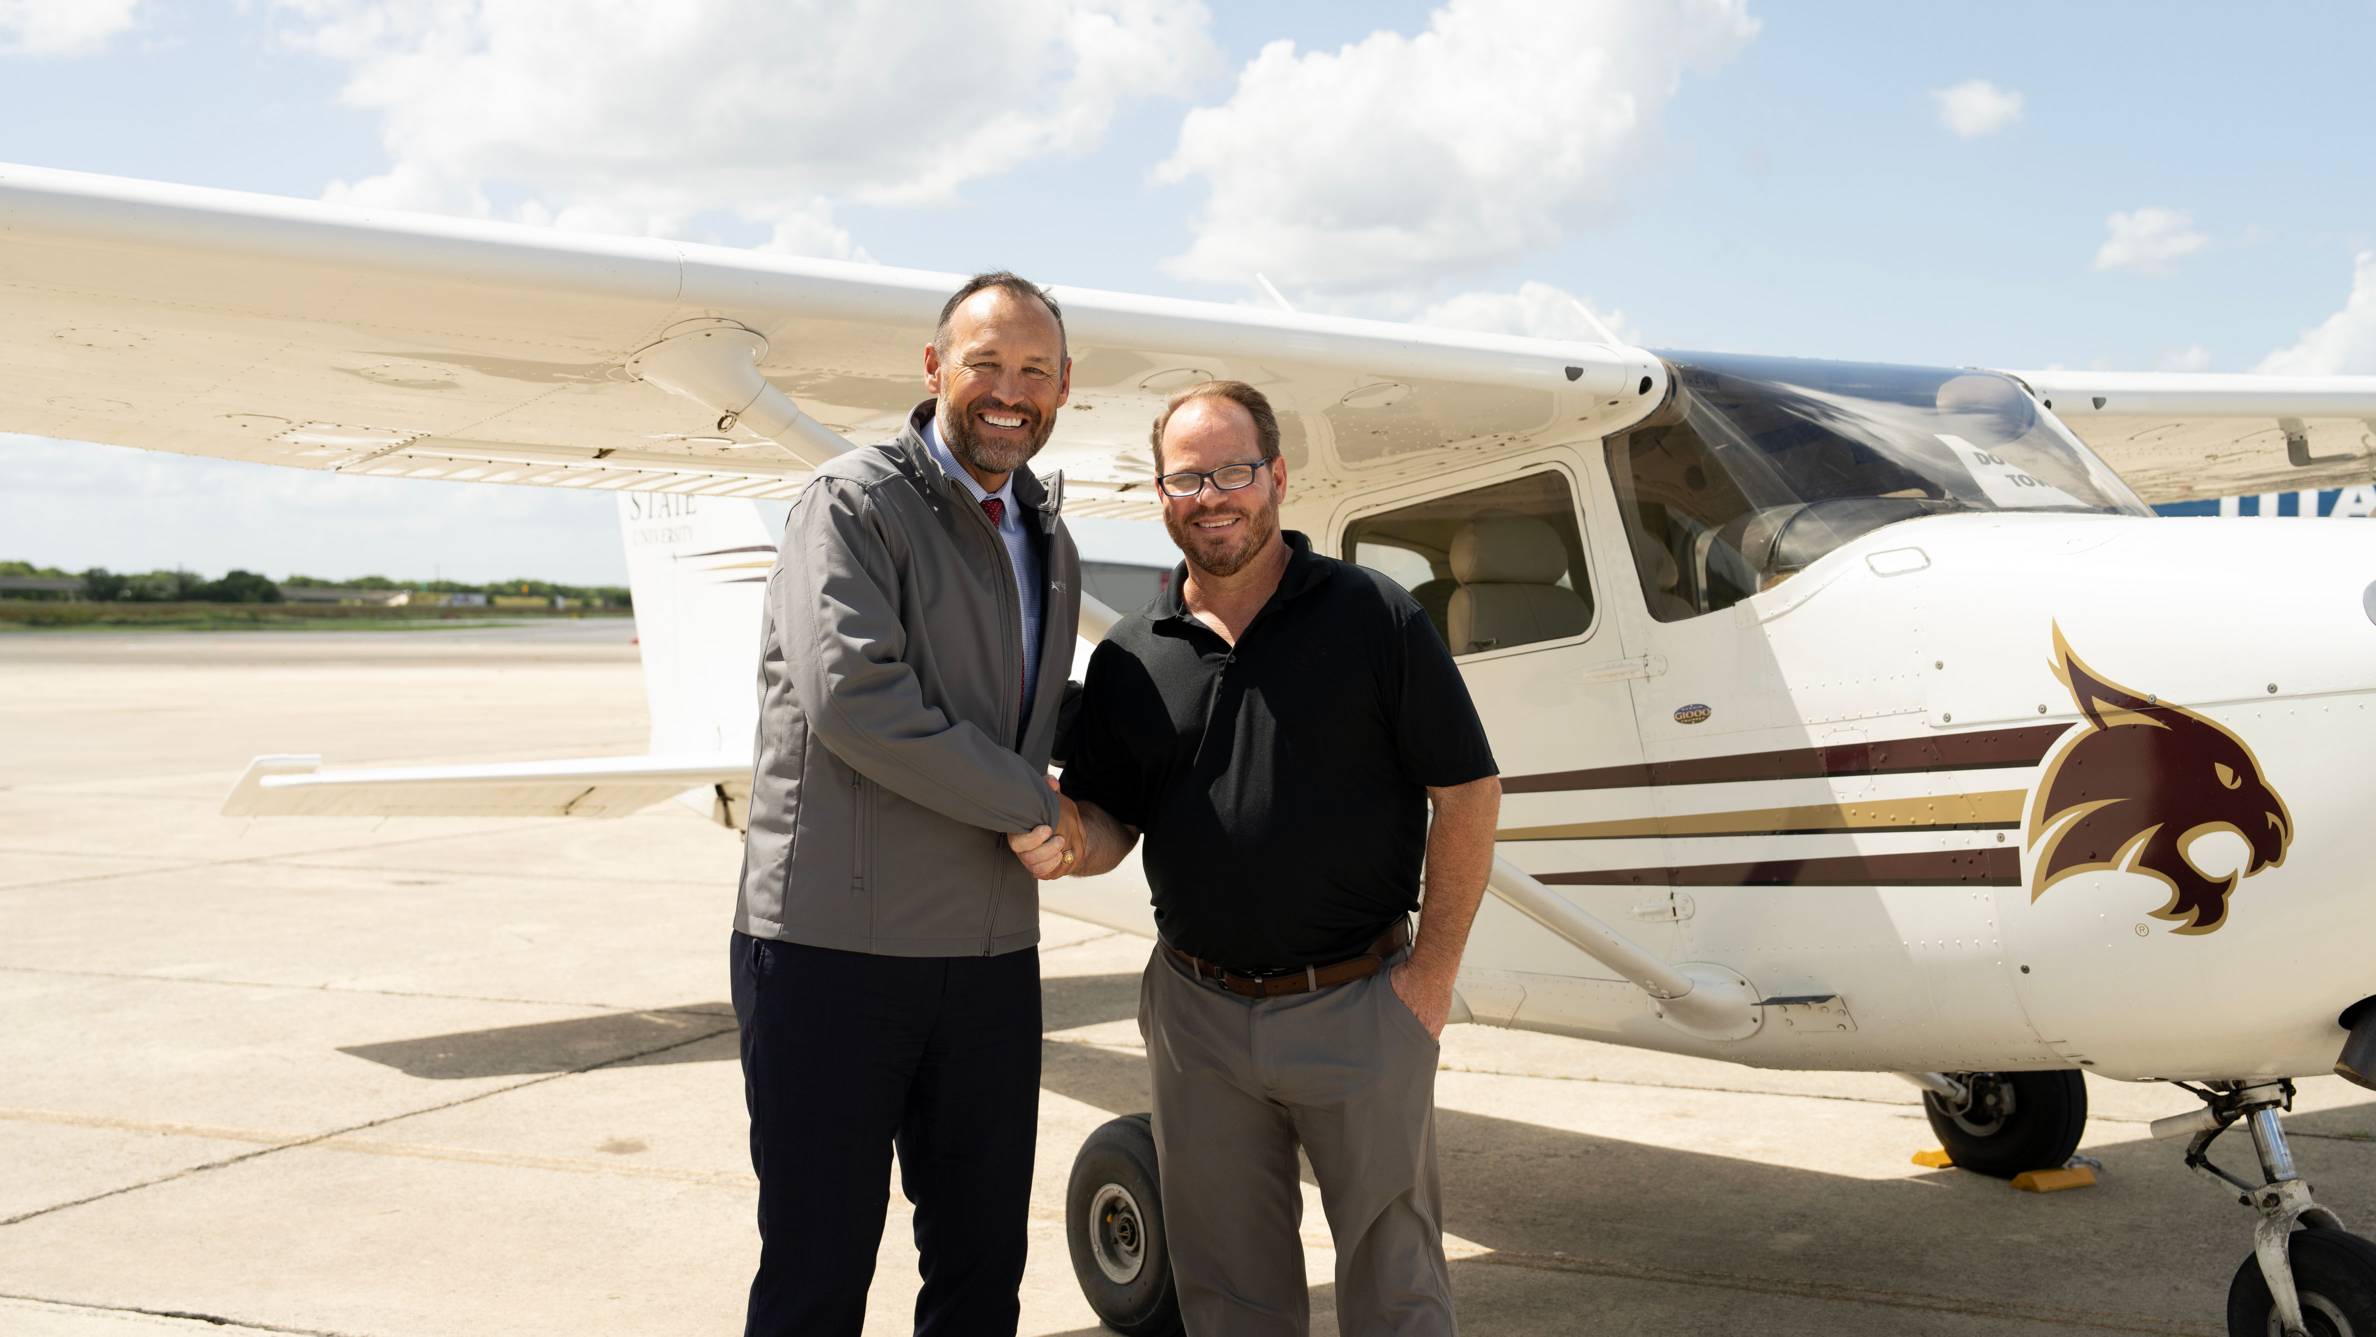 President Damphousse (left) poses for a photo with a Coast Flight executive in front of a TXST-branded plane.